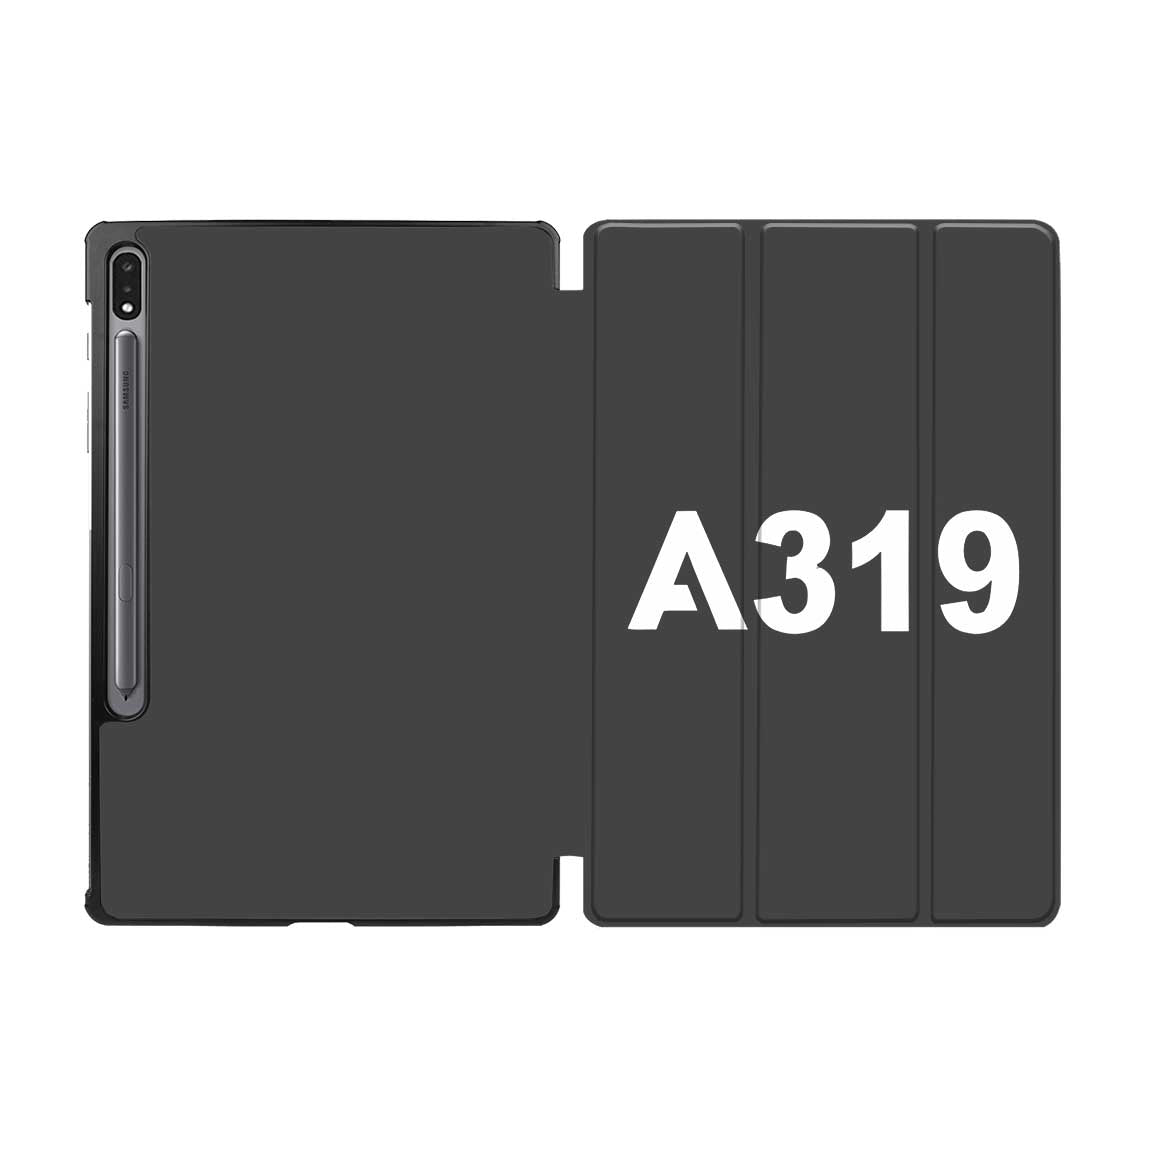 A319 Flat Text Designed Samsung Tablet Cases